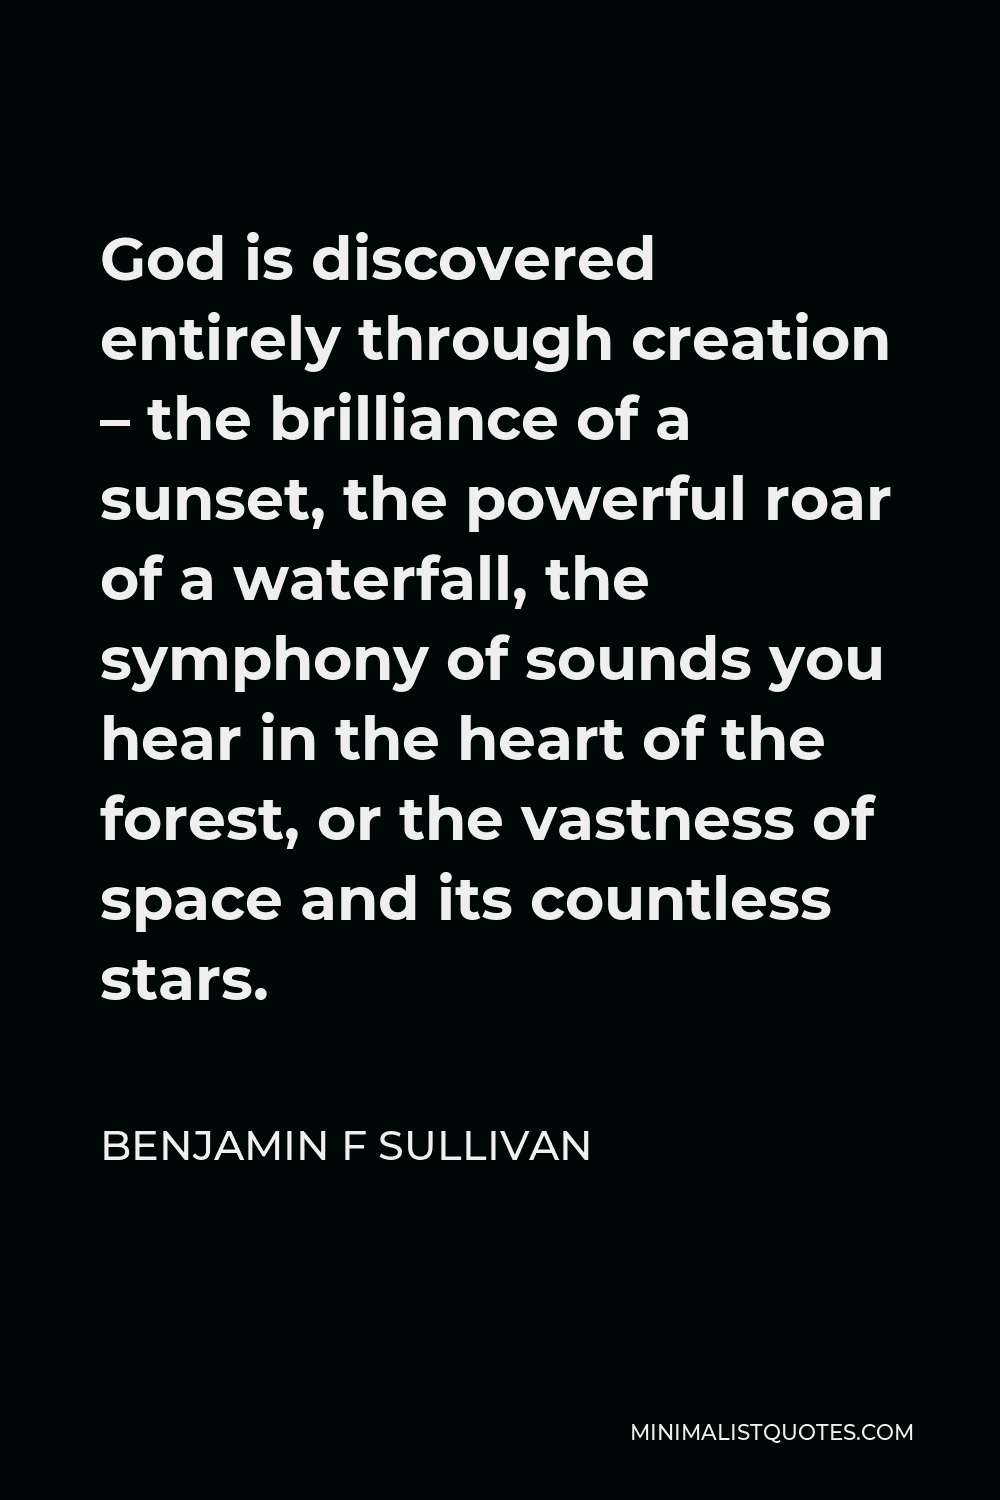 Benjamin F Sullivan Quote - God is discovered entirely through creation – the brilliance of a sunset, the powerful roar of a waterfall, the symphony of sounds you hear in the heart of the forest, or the vastness of space and its countless stars.